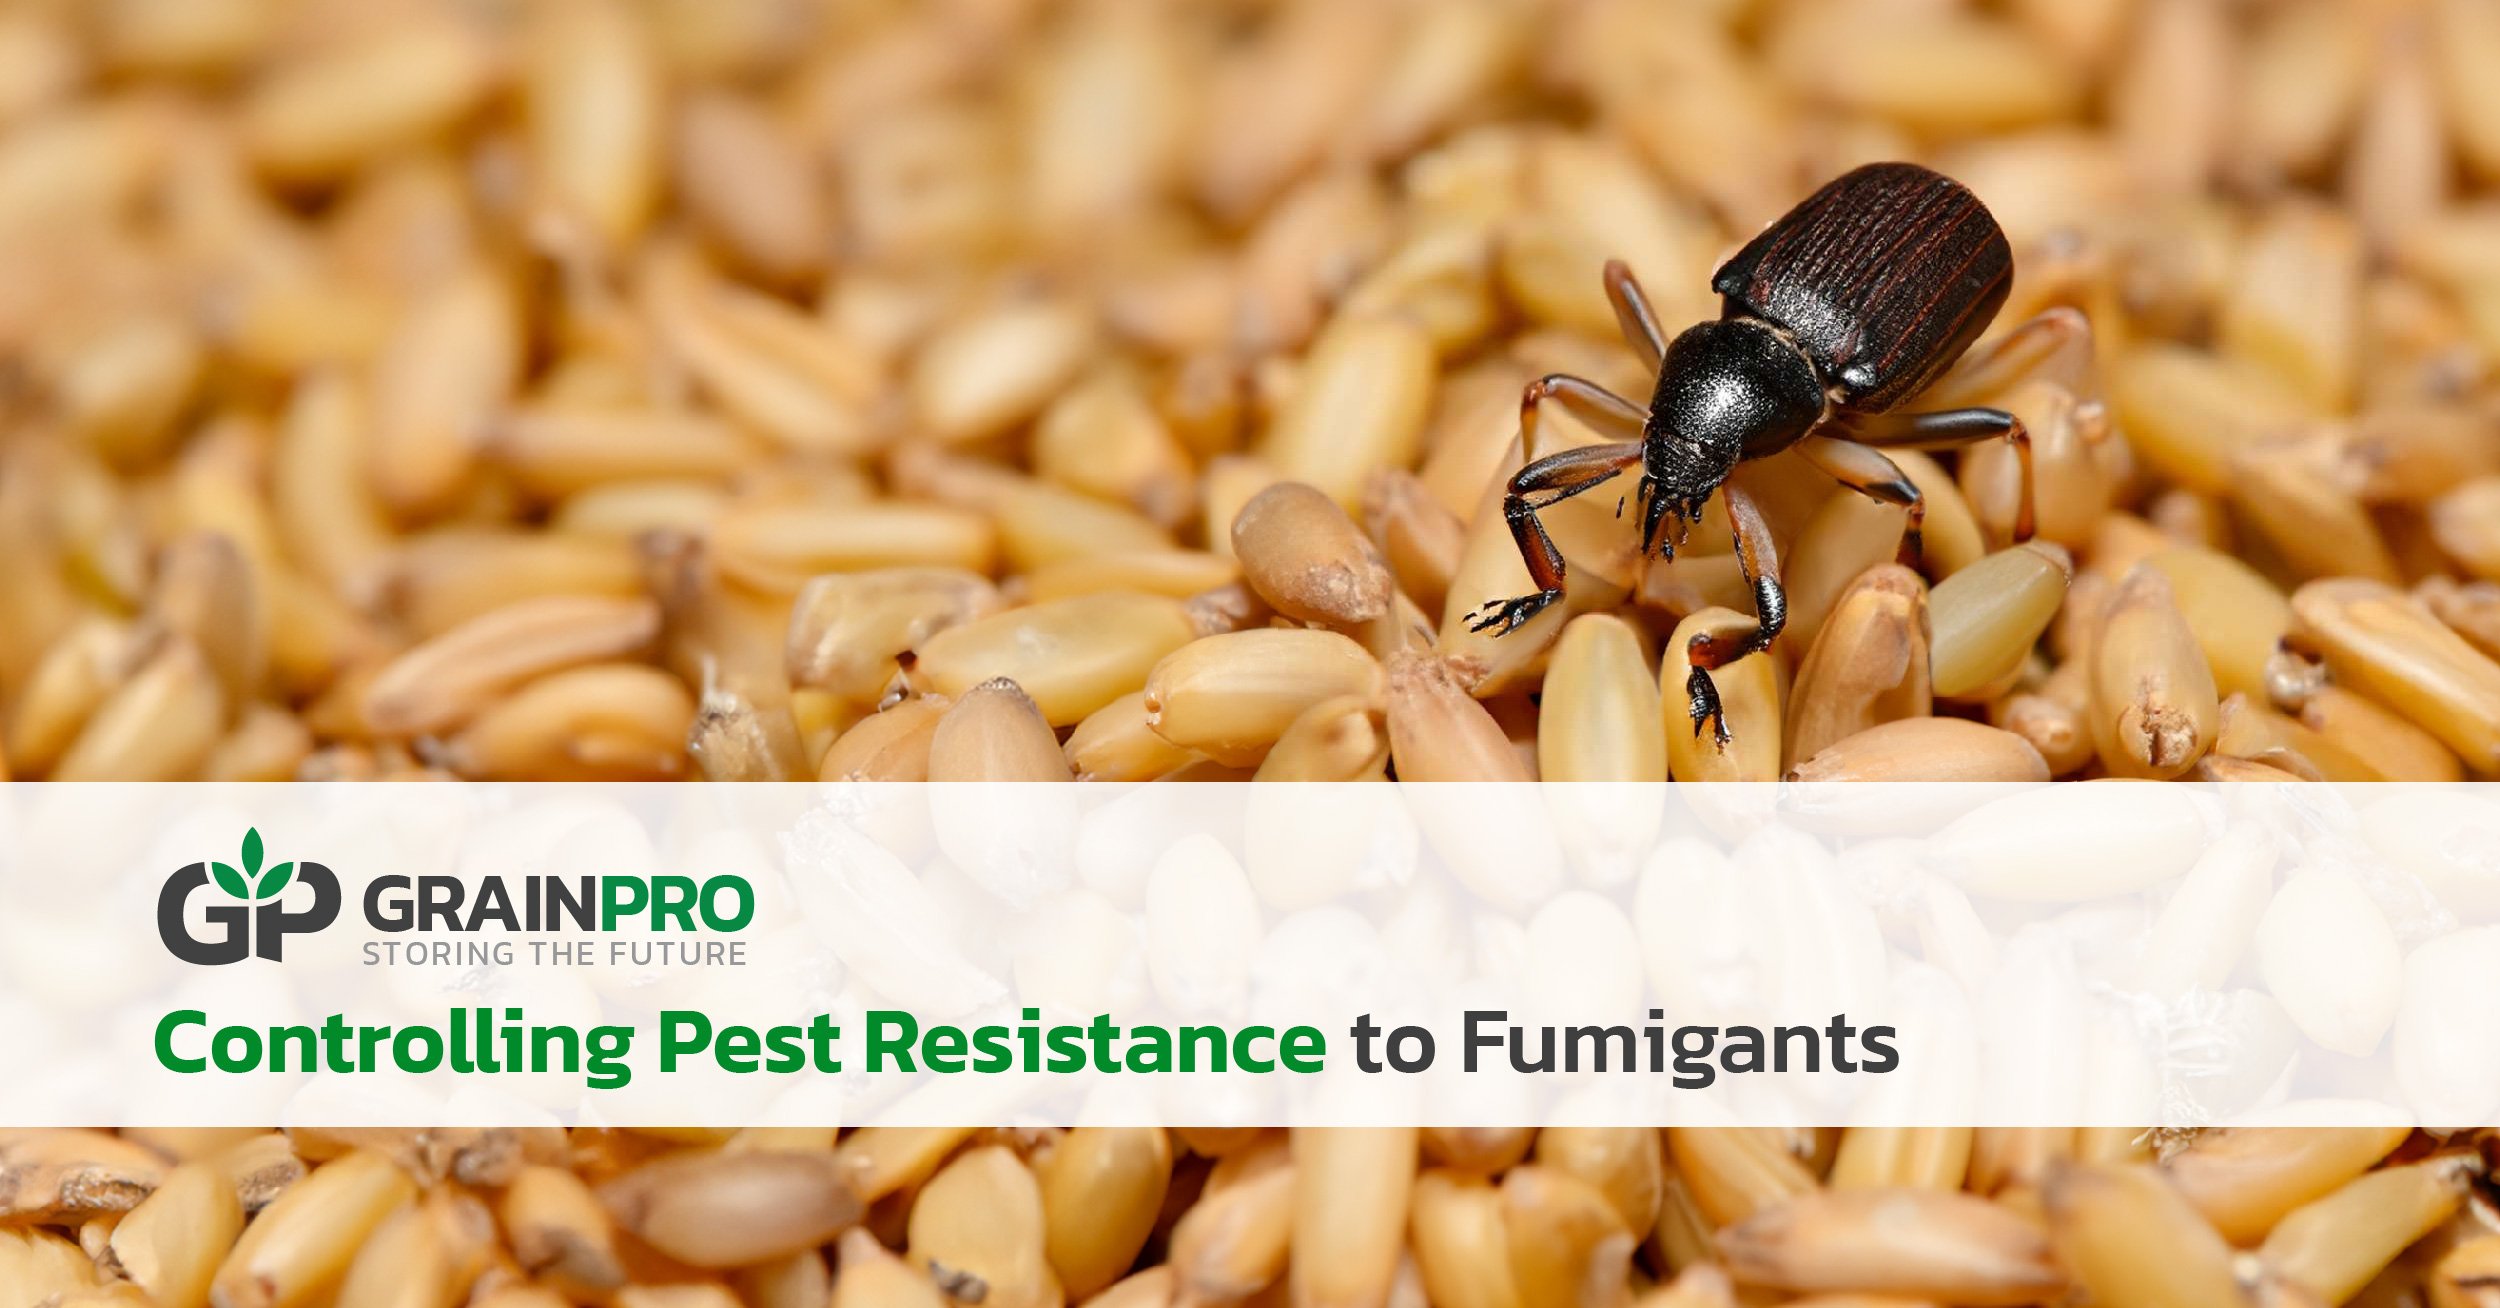 Controlling Pest Resistance to Fumigants